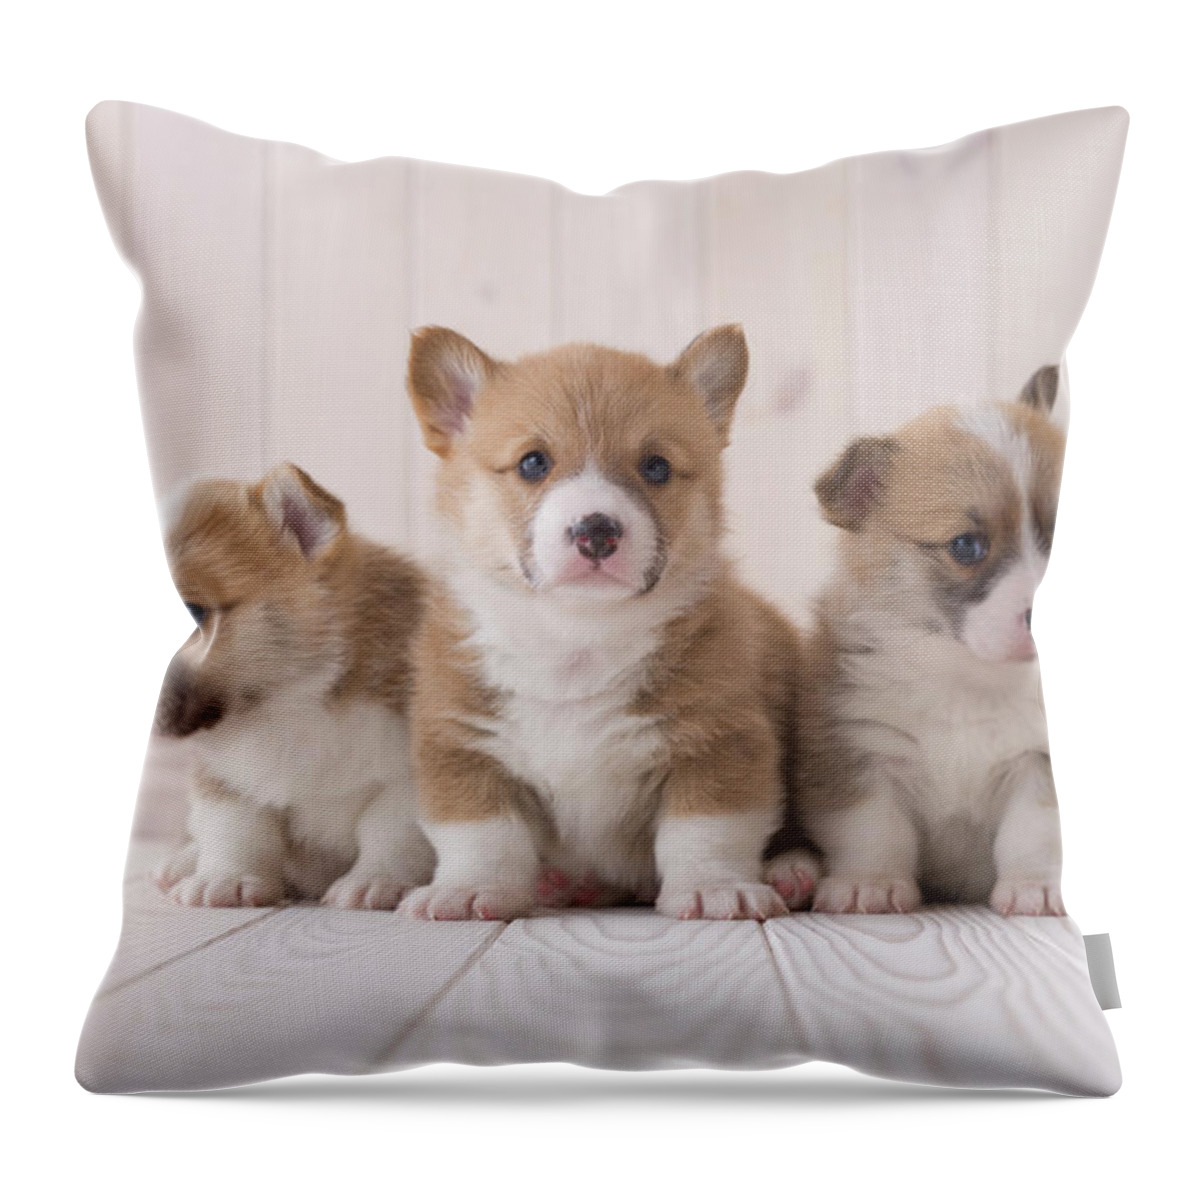 Pets Throw Pillow featuring the photograph Three Pembroke Welsh Corgi Sitting On by Mixa